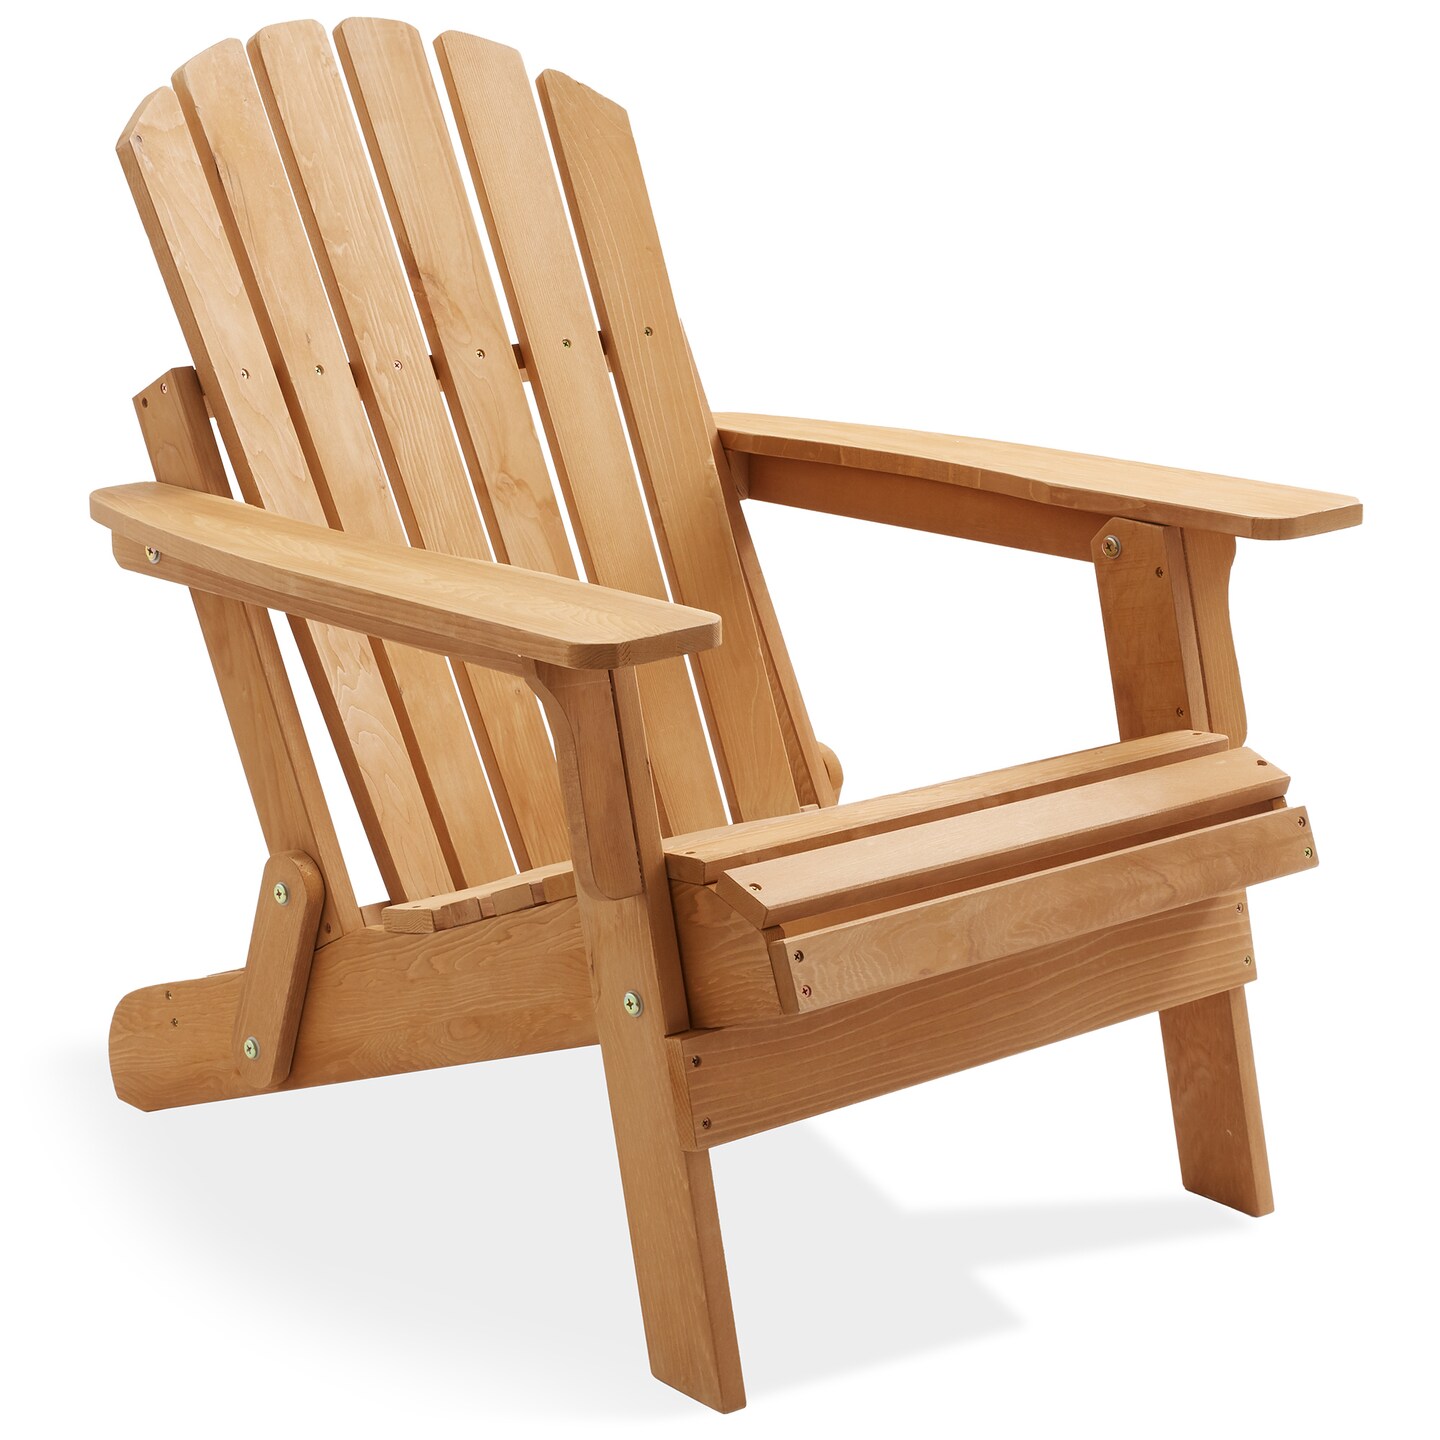 Casafield Oversized Folding Adirondack Chair, Cedar Wood Outdoor Fire Pit Lounge Chairs for Patio, Deck, Yard, Lawn and Garden Seating, Partially Pre-Assembled - Natural